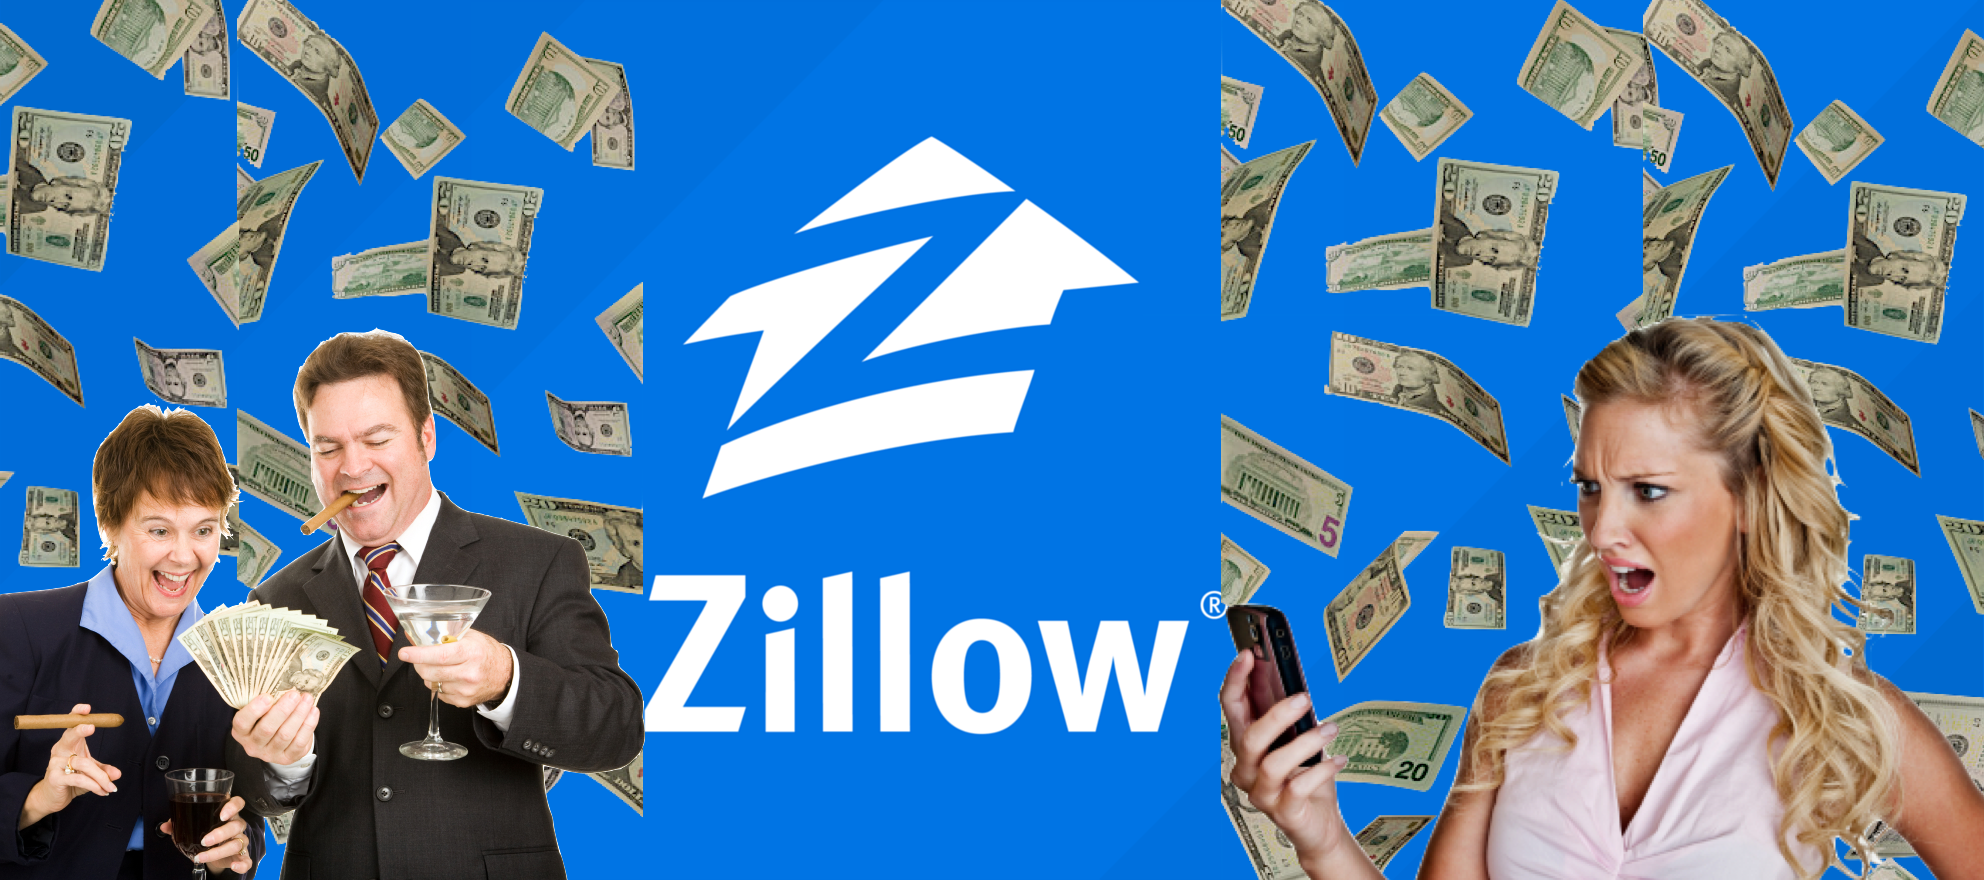 Confessions of a Zillow Addict